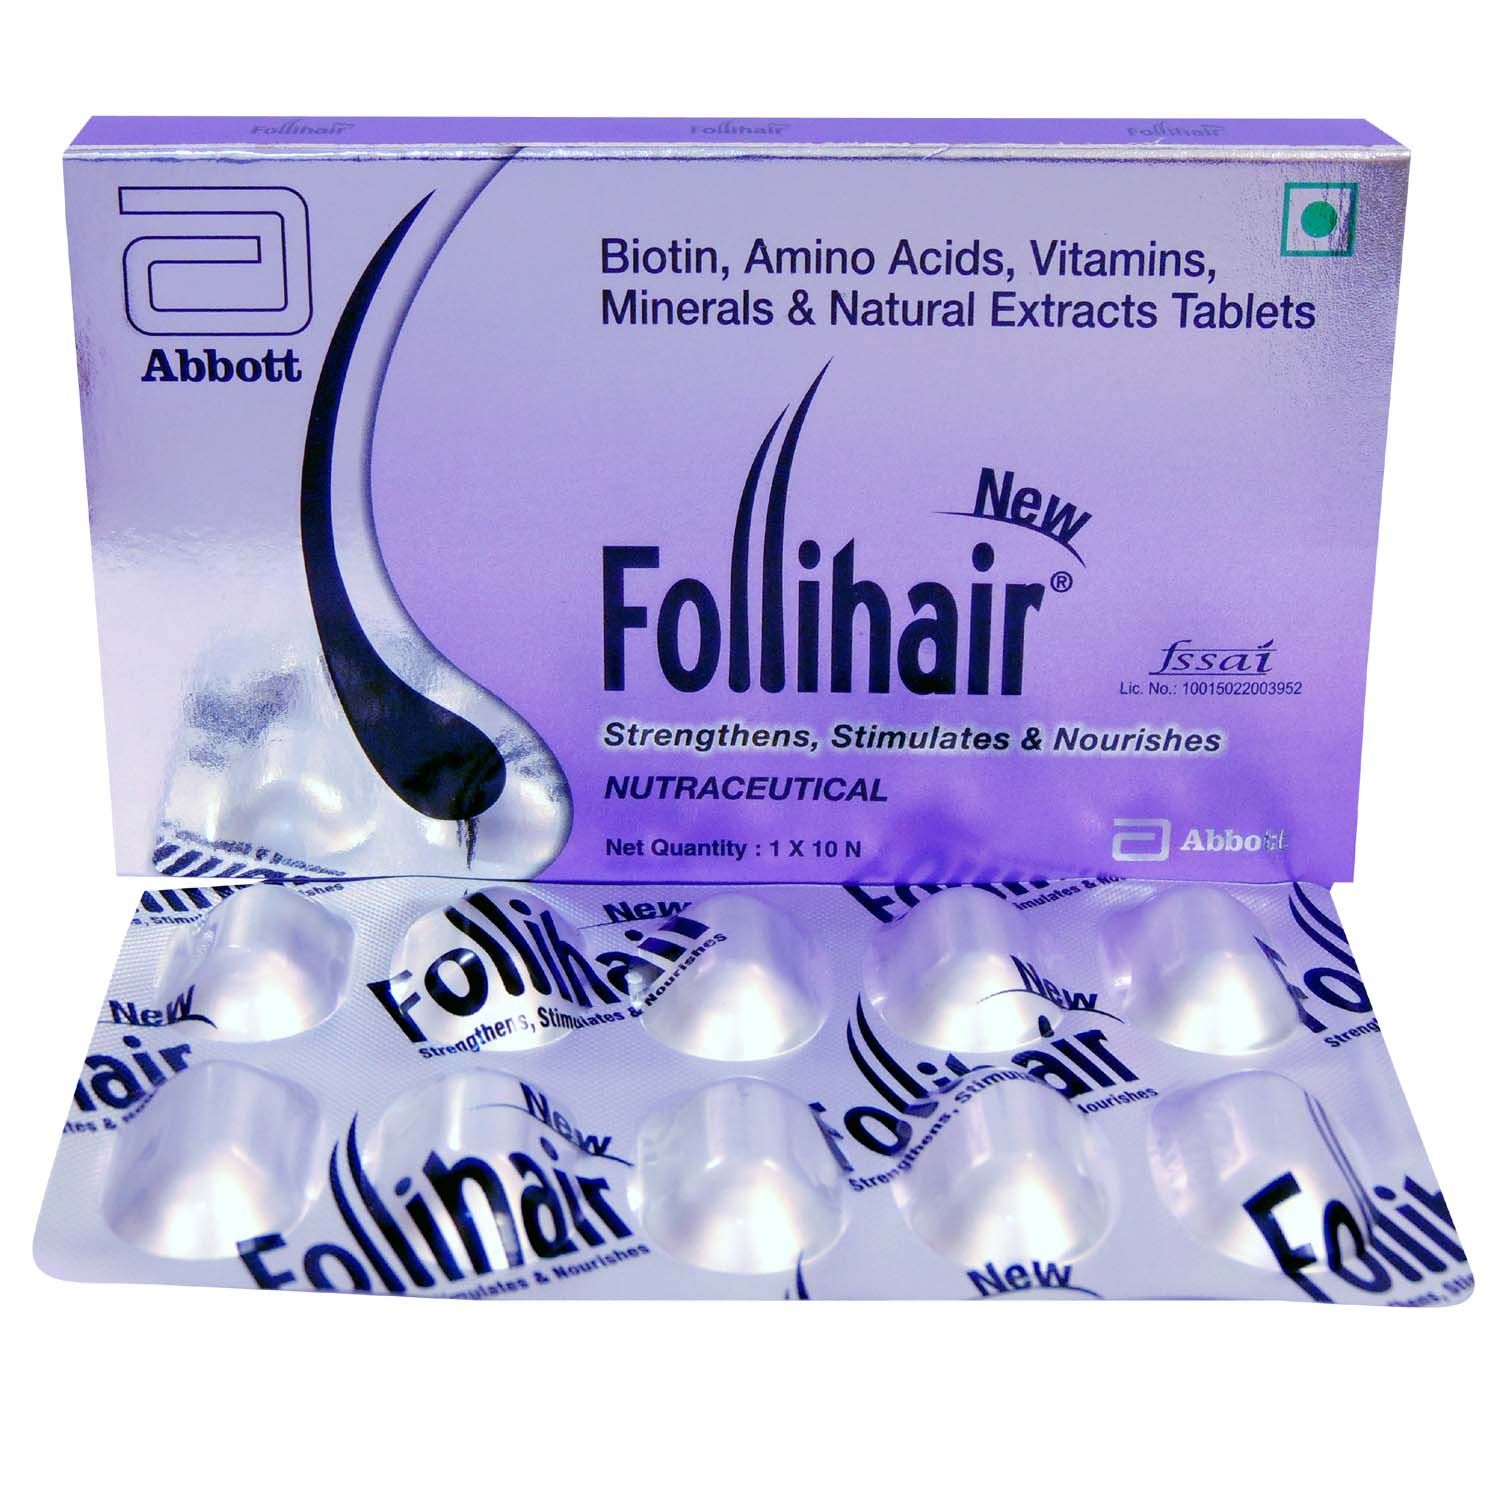 New Follihair Tablet 10's Price, Uses, Side Effects, Composition - Apollo  Pharmacy